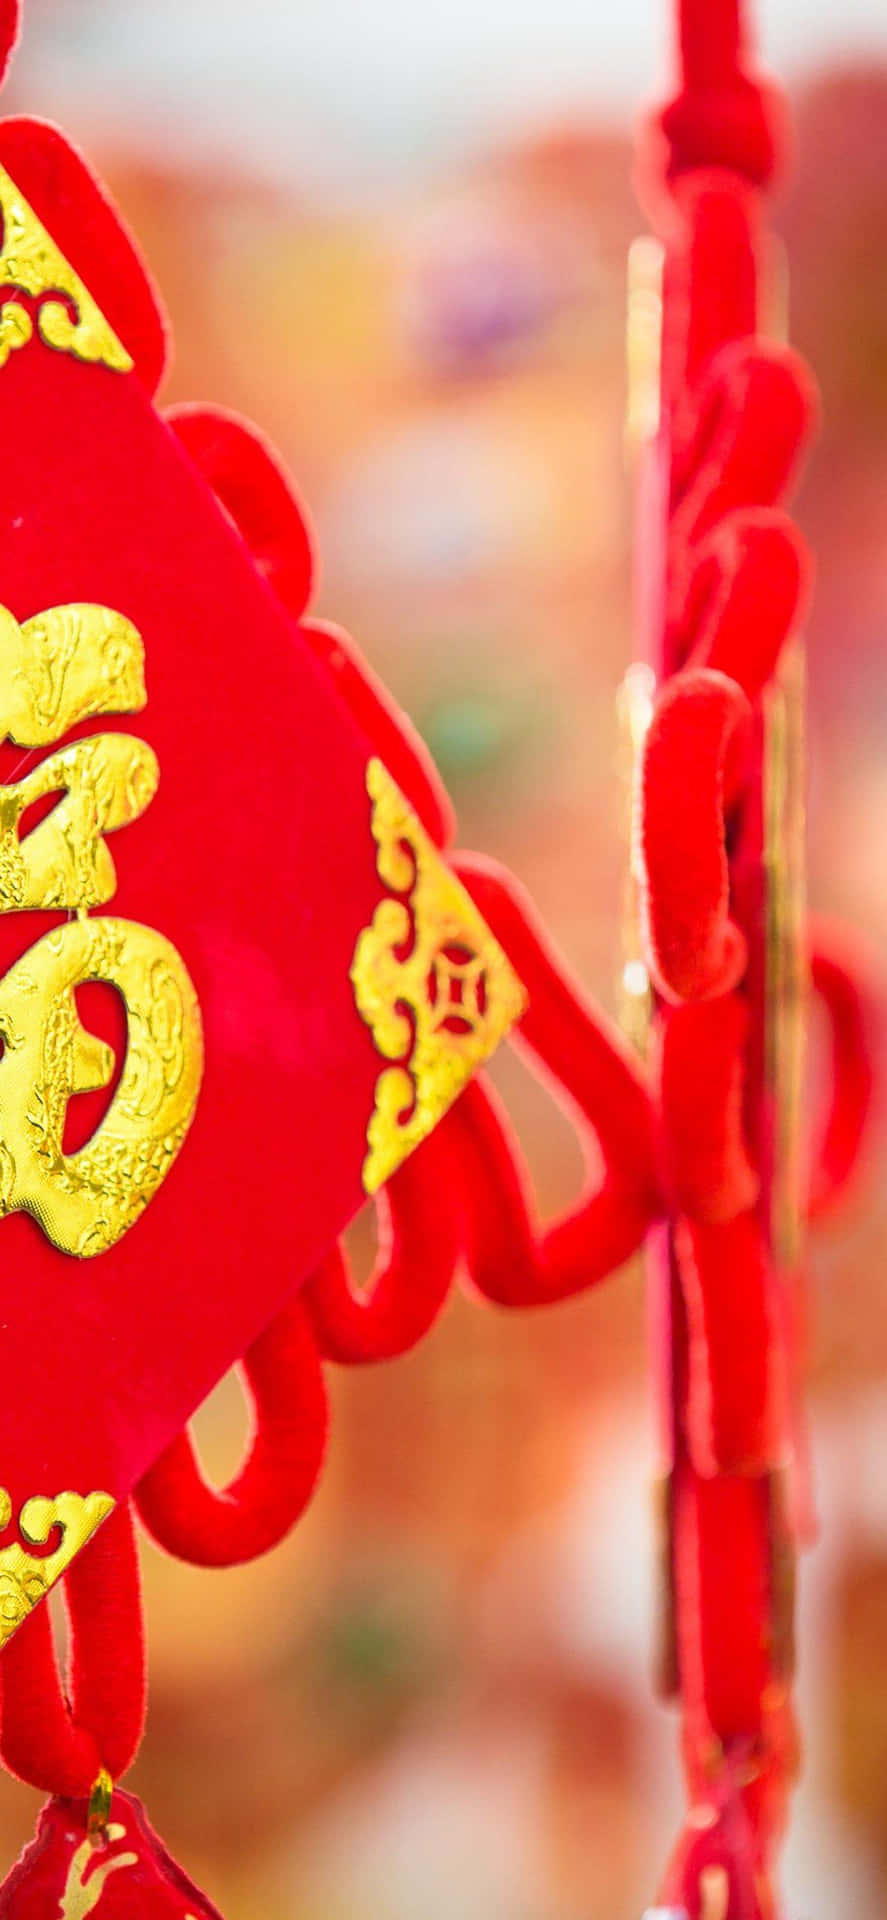 "Welcome in the Year of the Rat with this special Chinese New Year Iphone" Wallpaper